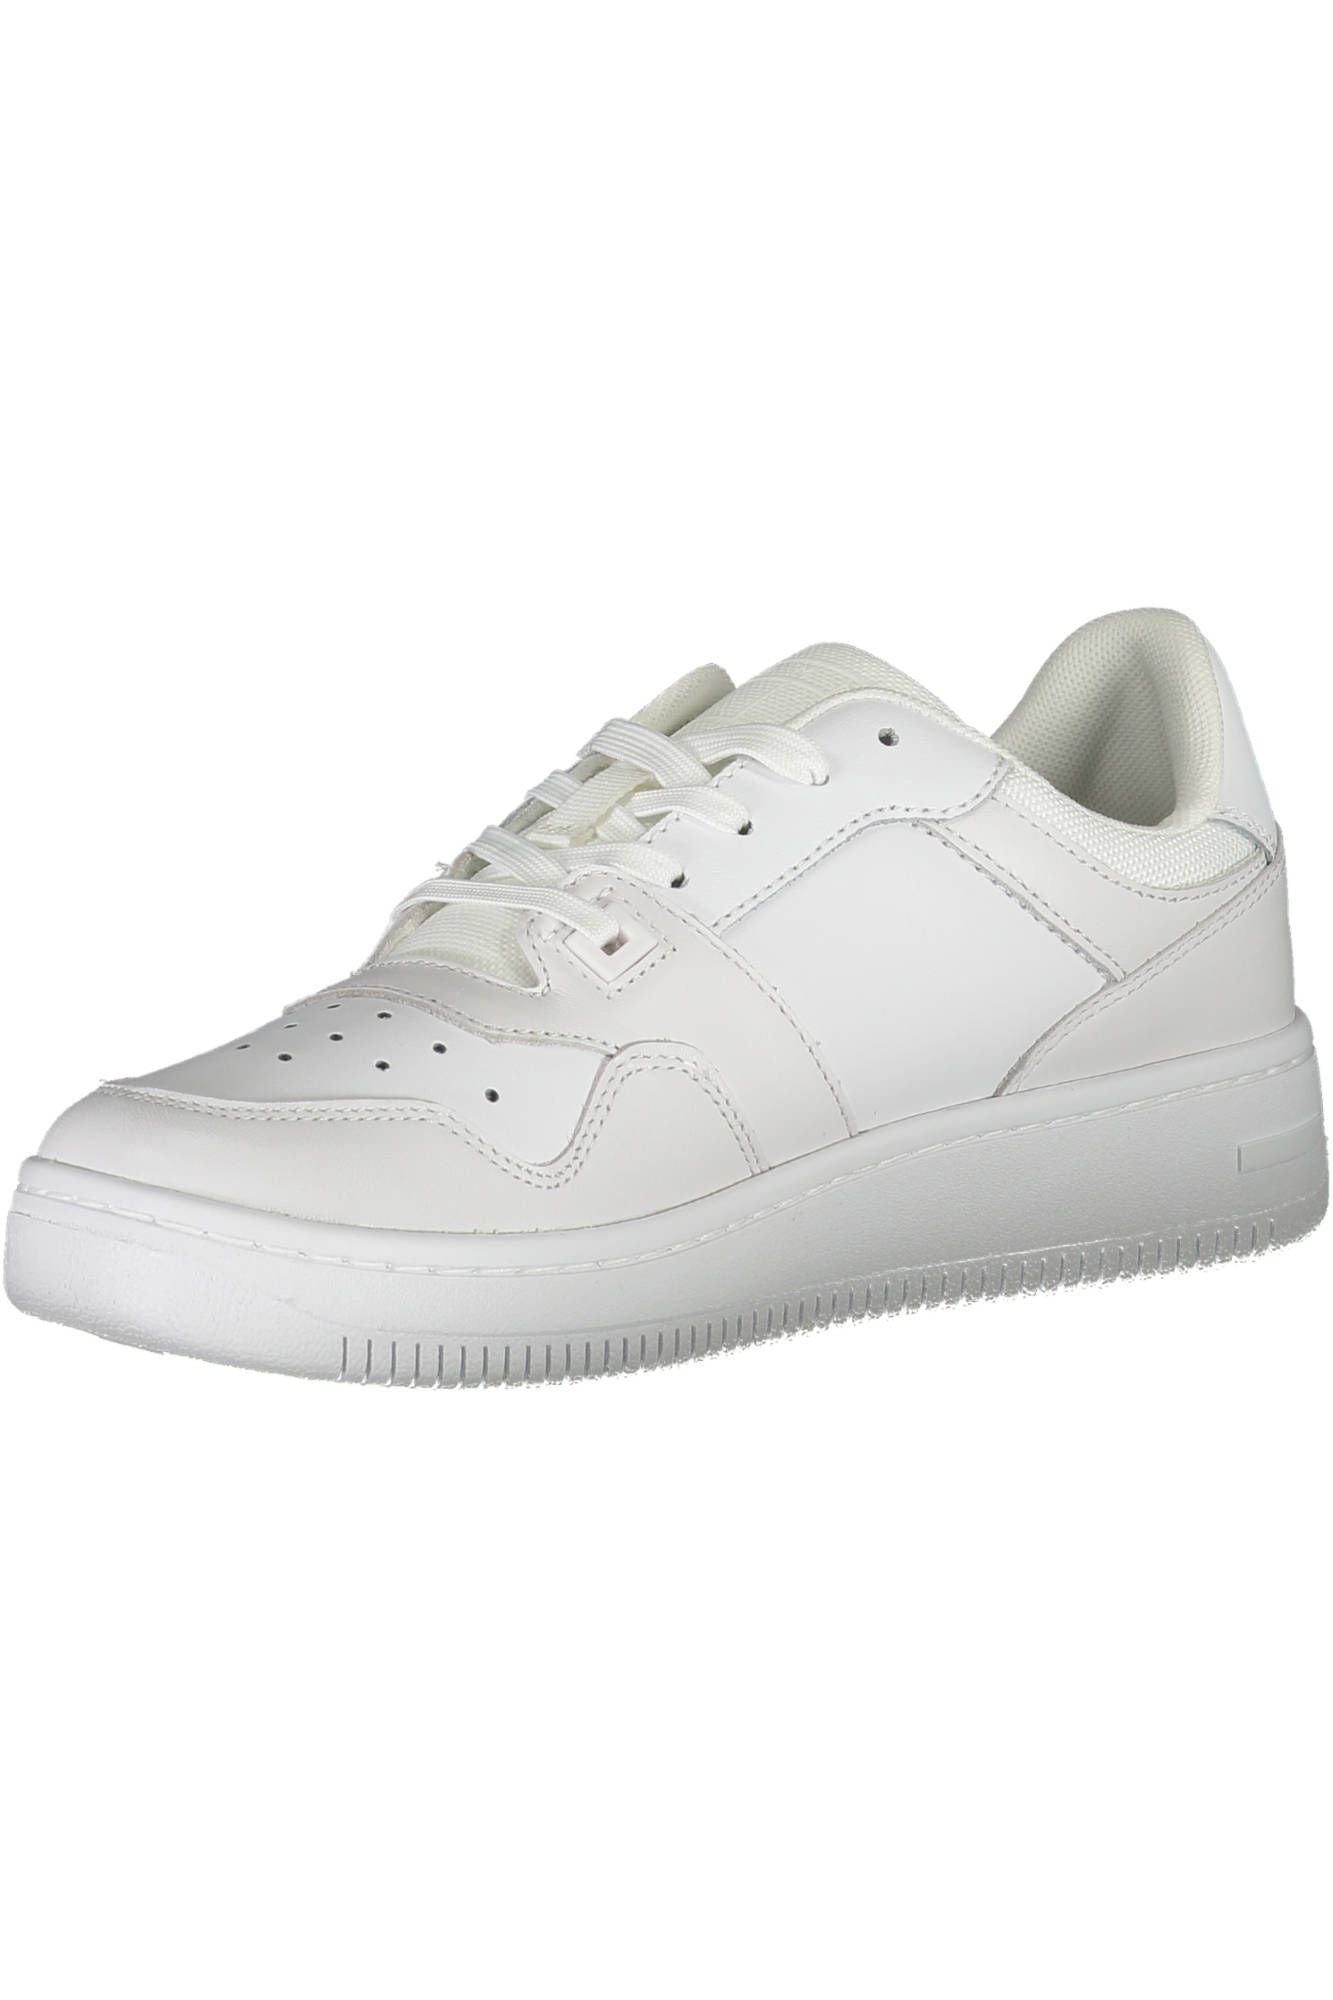 Tommy Hilfiger Sleek White Sneakers with Eco-Friendly Twist